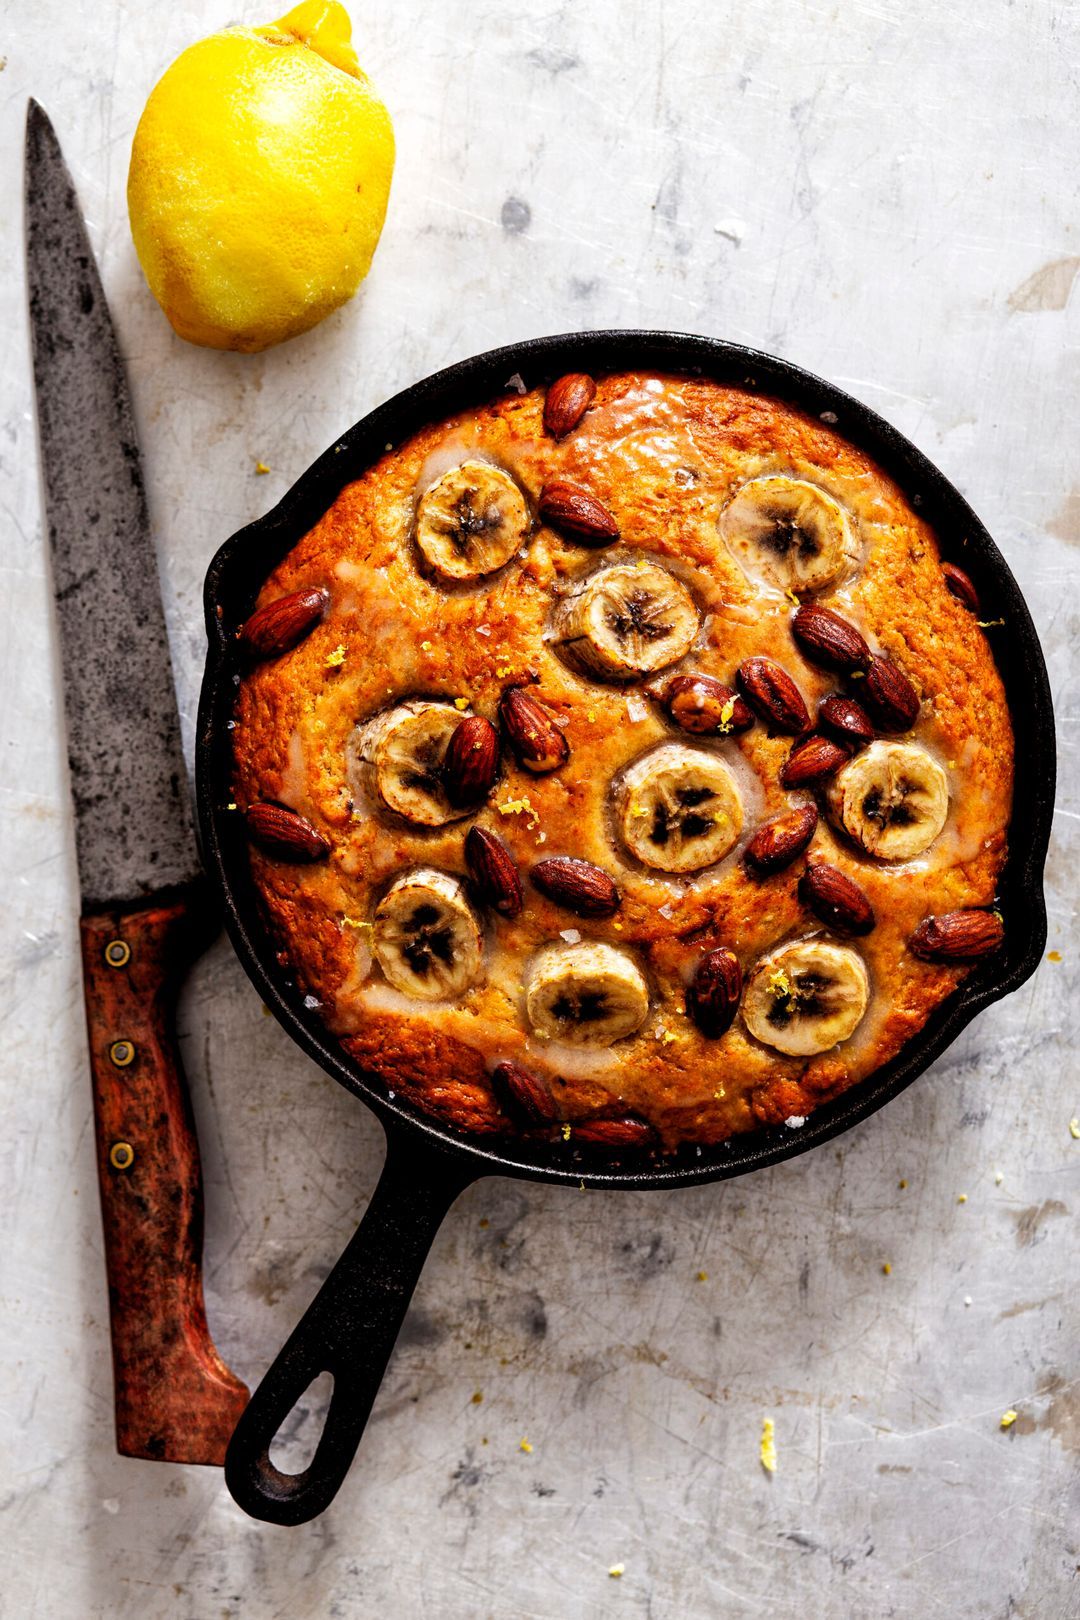 Skillet banana bread with smoked almonds